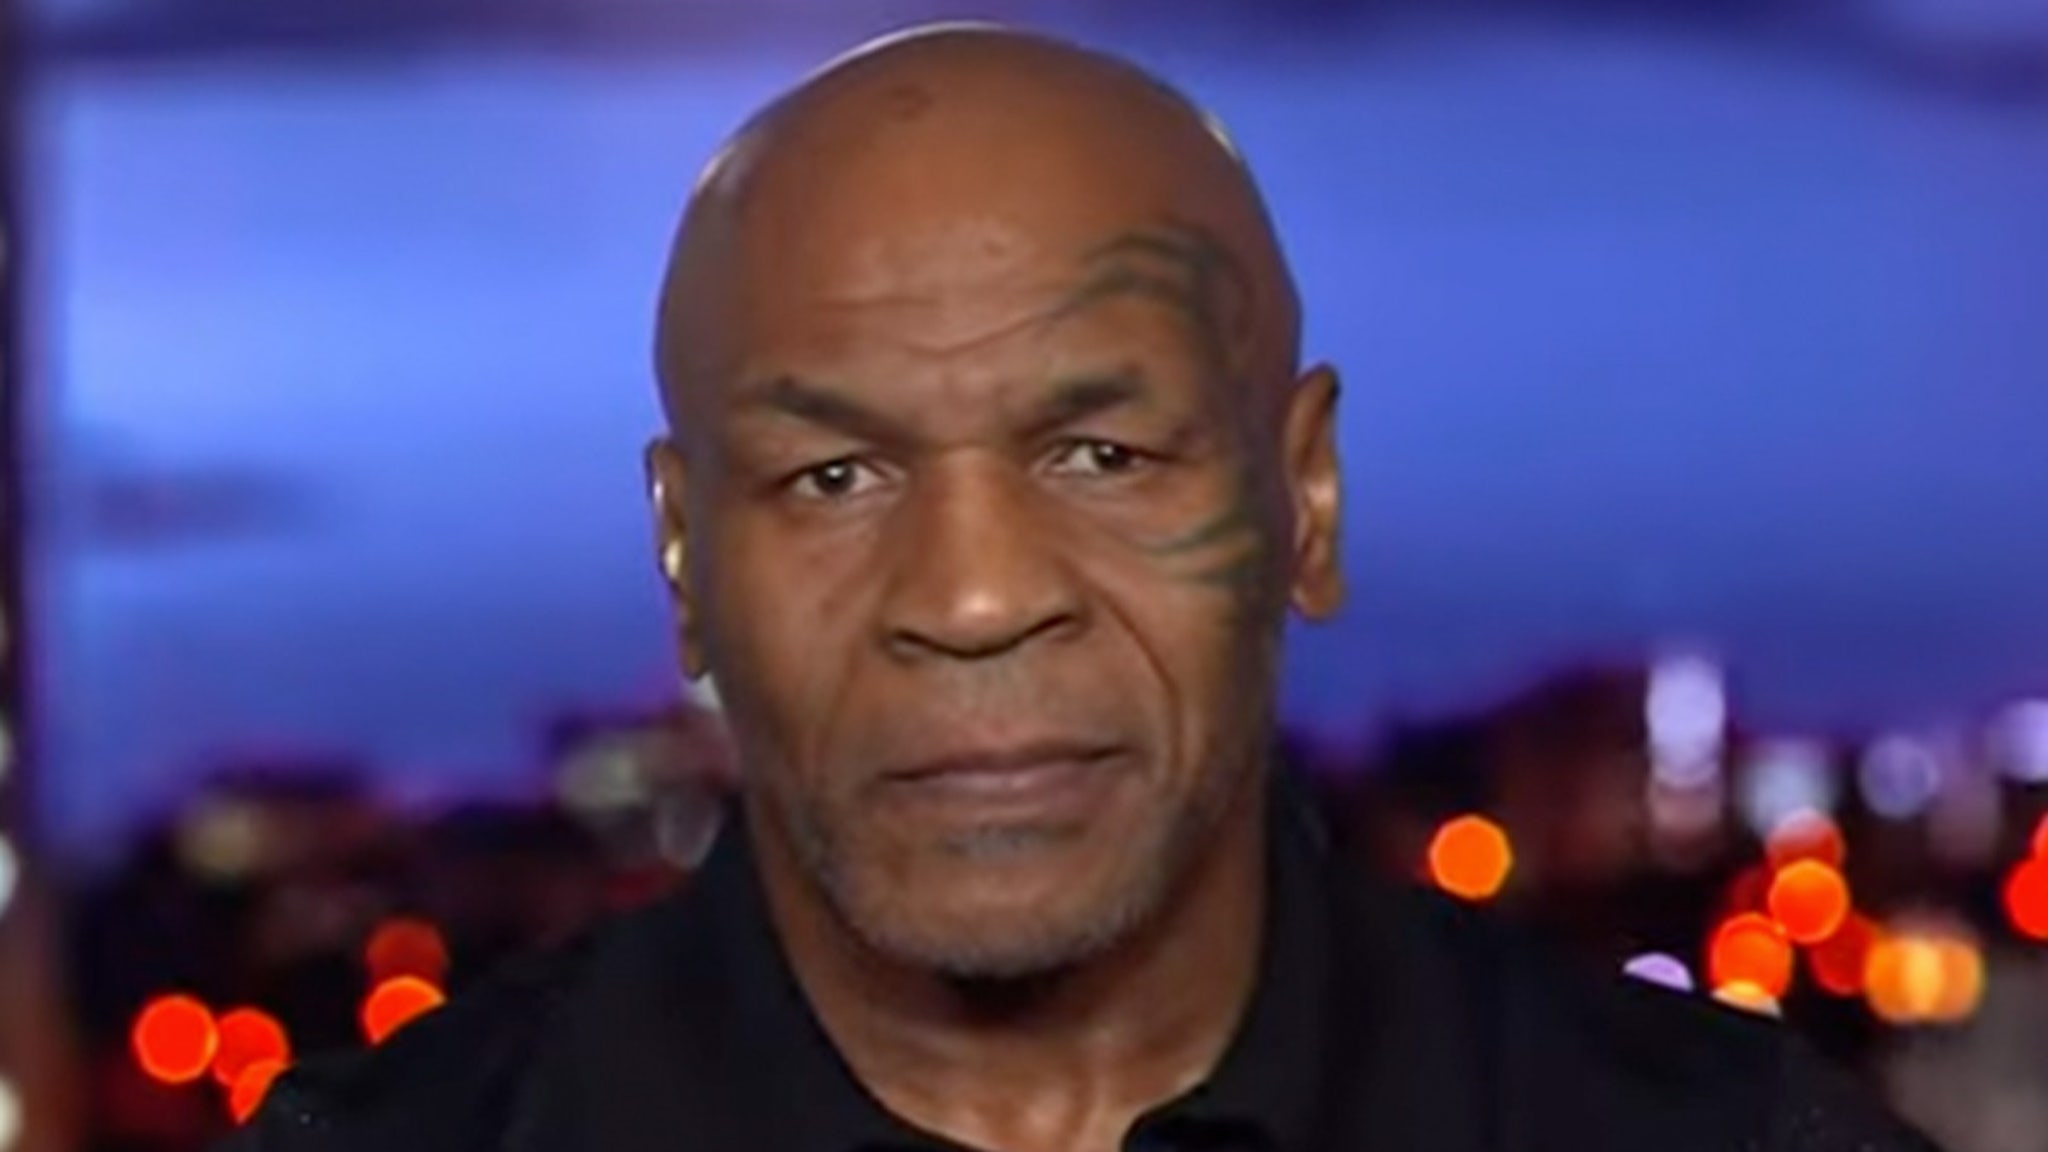 Mike Tyson Says He's Training Round The Clock For Jake Paul, 'I Take It